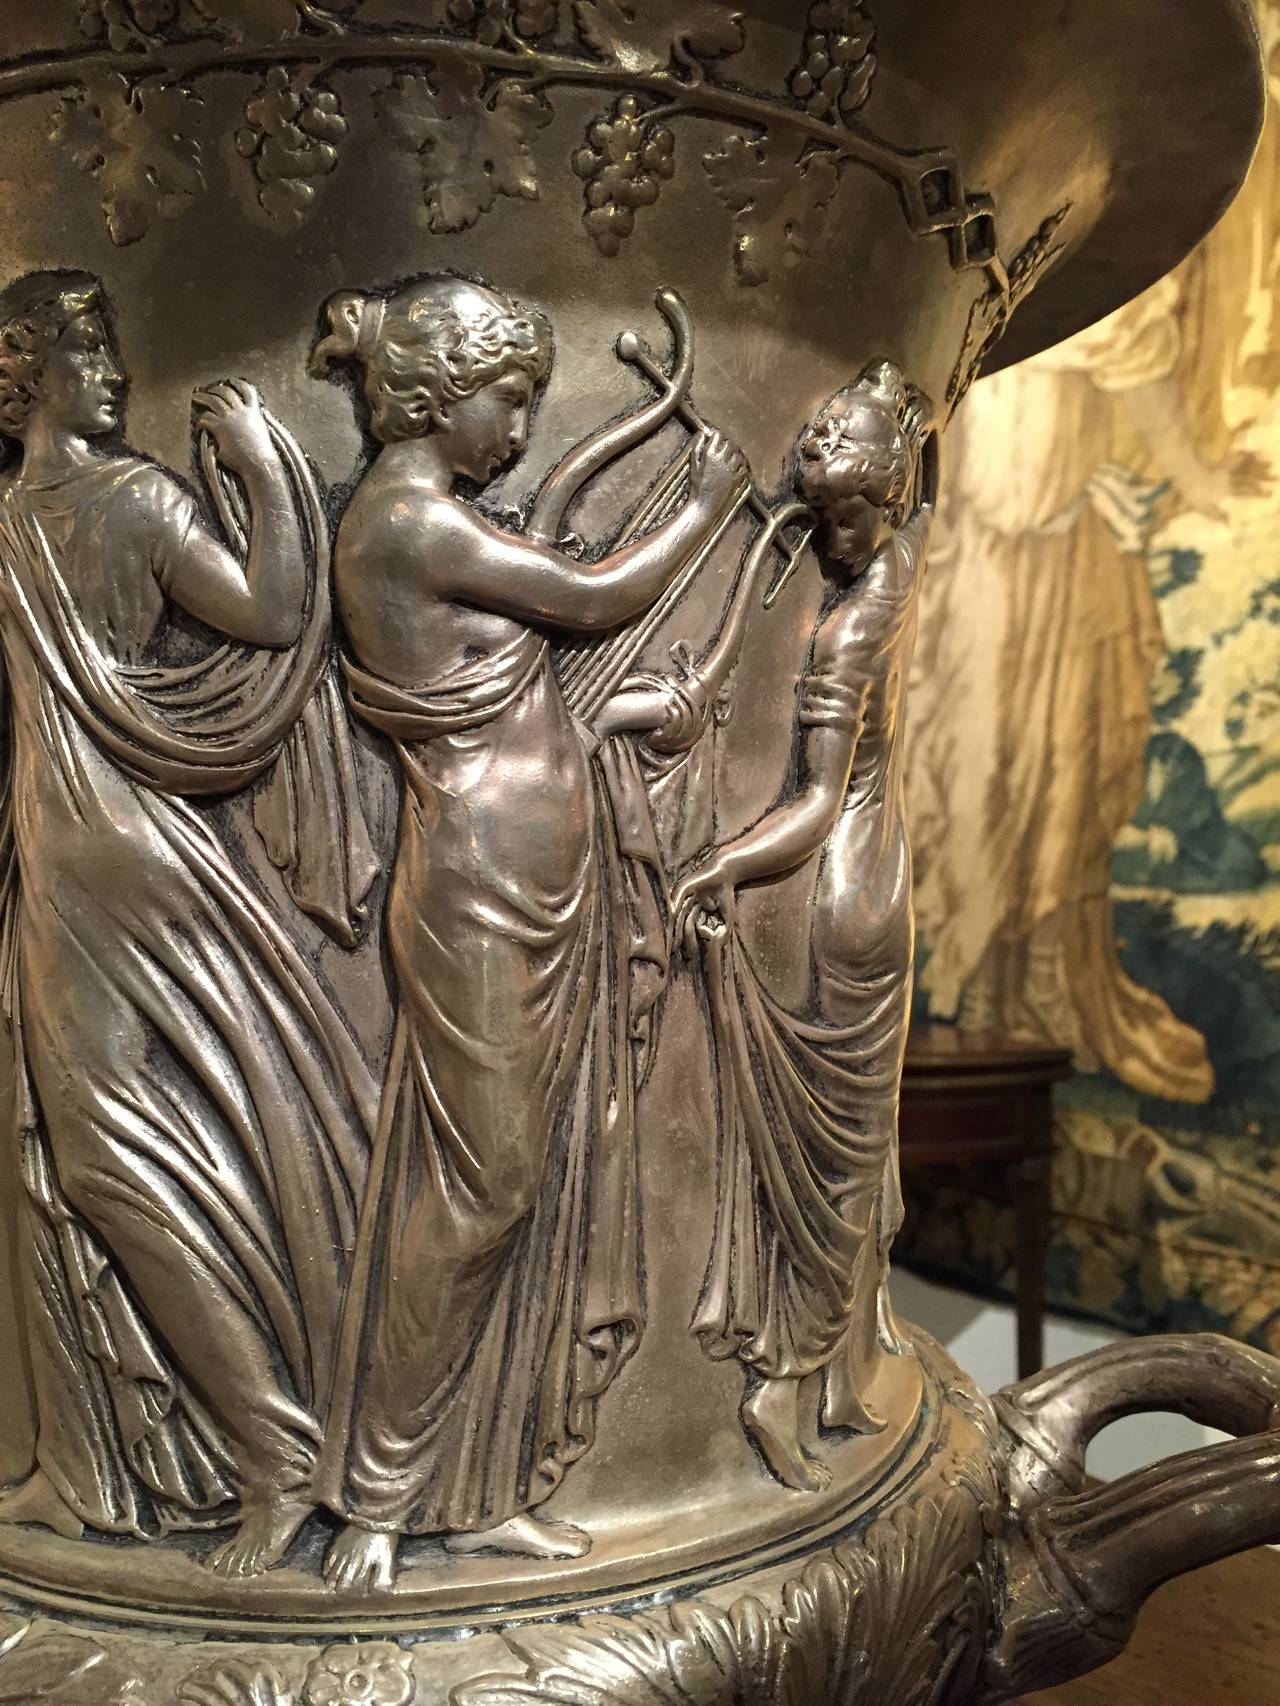 This pair of urns is cast from from metal (possibly brass), and then silvered for a beautiful finish.  They most likely date to the early to mid 1900's, and each one is decorated with Grecian or Greco-Roman motifs.  The main body has a surround of